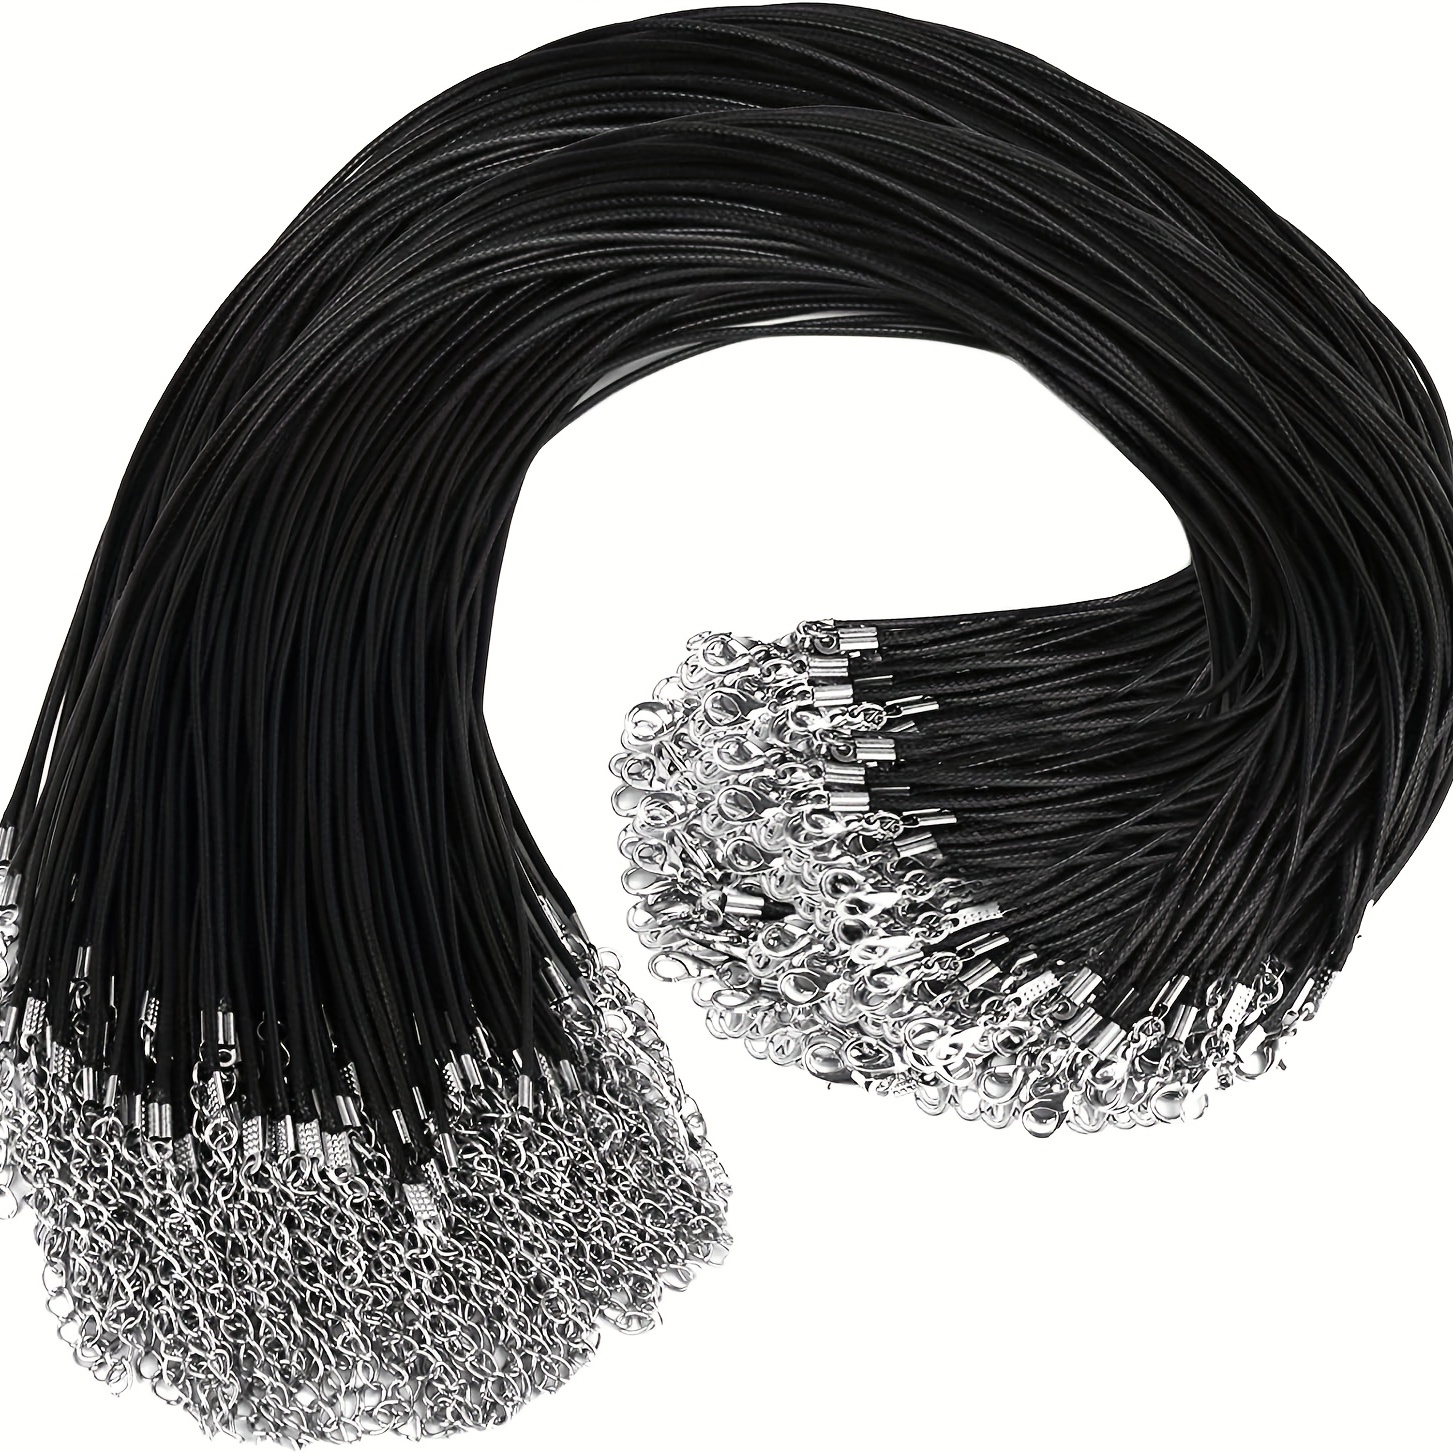 Black Waxed Necklace Cord String 1.5mm for Jewelry Bracelets Making Beading Crafting String Waxed Cotton Rope for Jewelry Display and Hanging